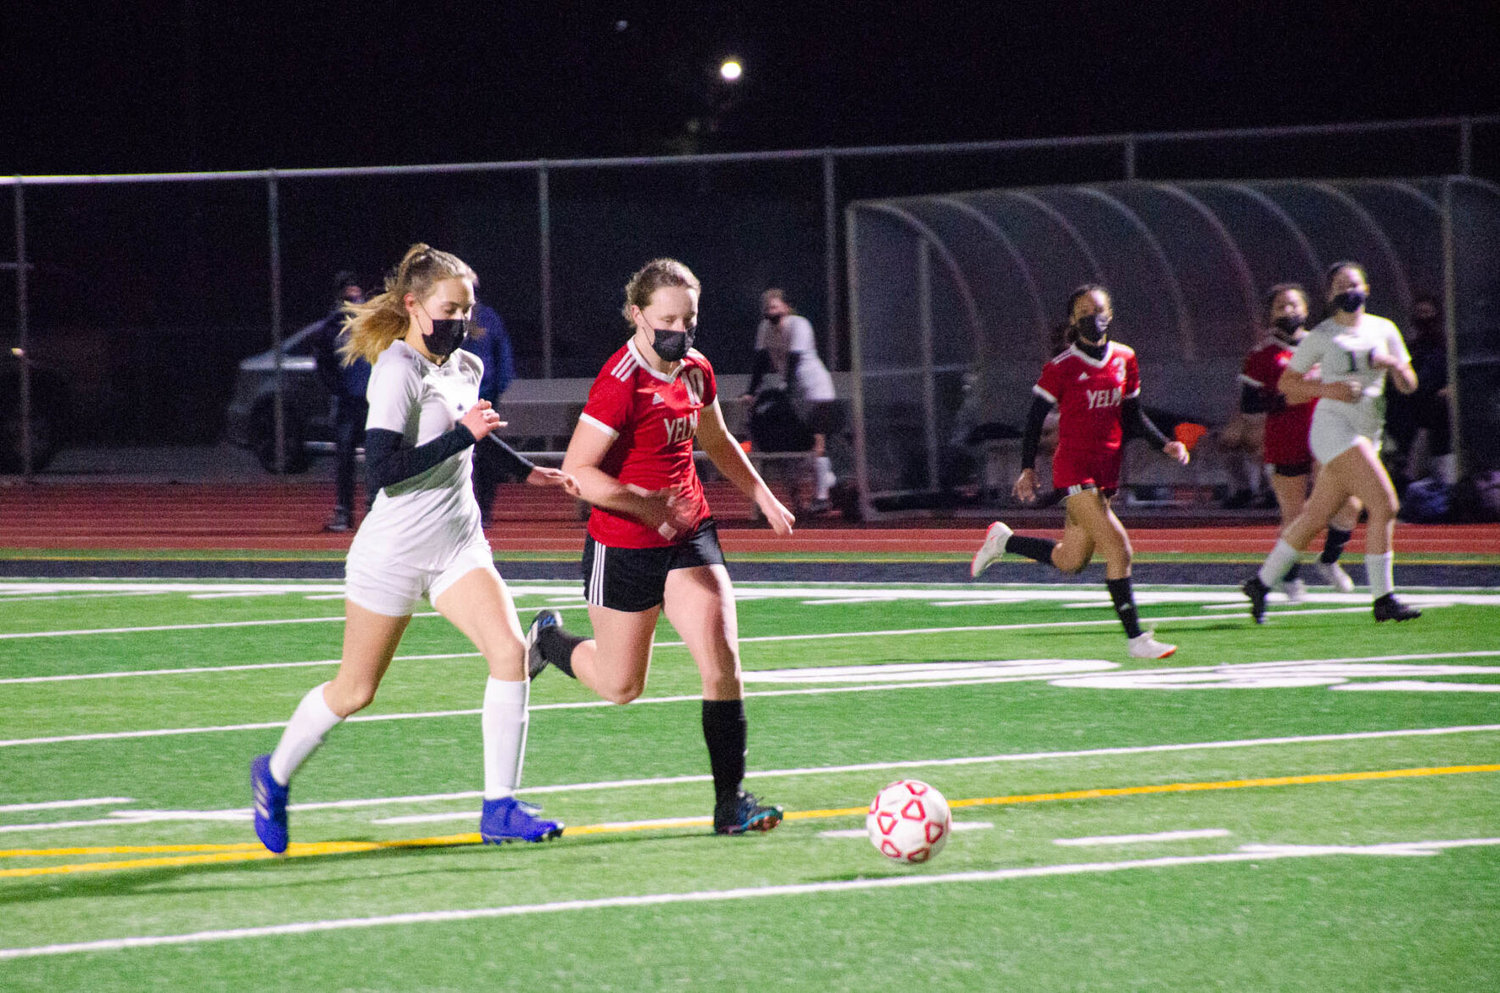 Junior forward Jordan Rabalais runs the ball in past River Ridge during one of their previous games. Rabalais is one of several Yelm athletes who were named to the 2020 South Sound All-Conference Girls Soccer Team. 